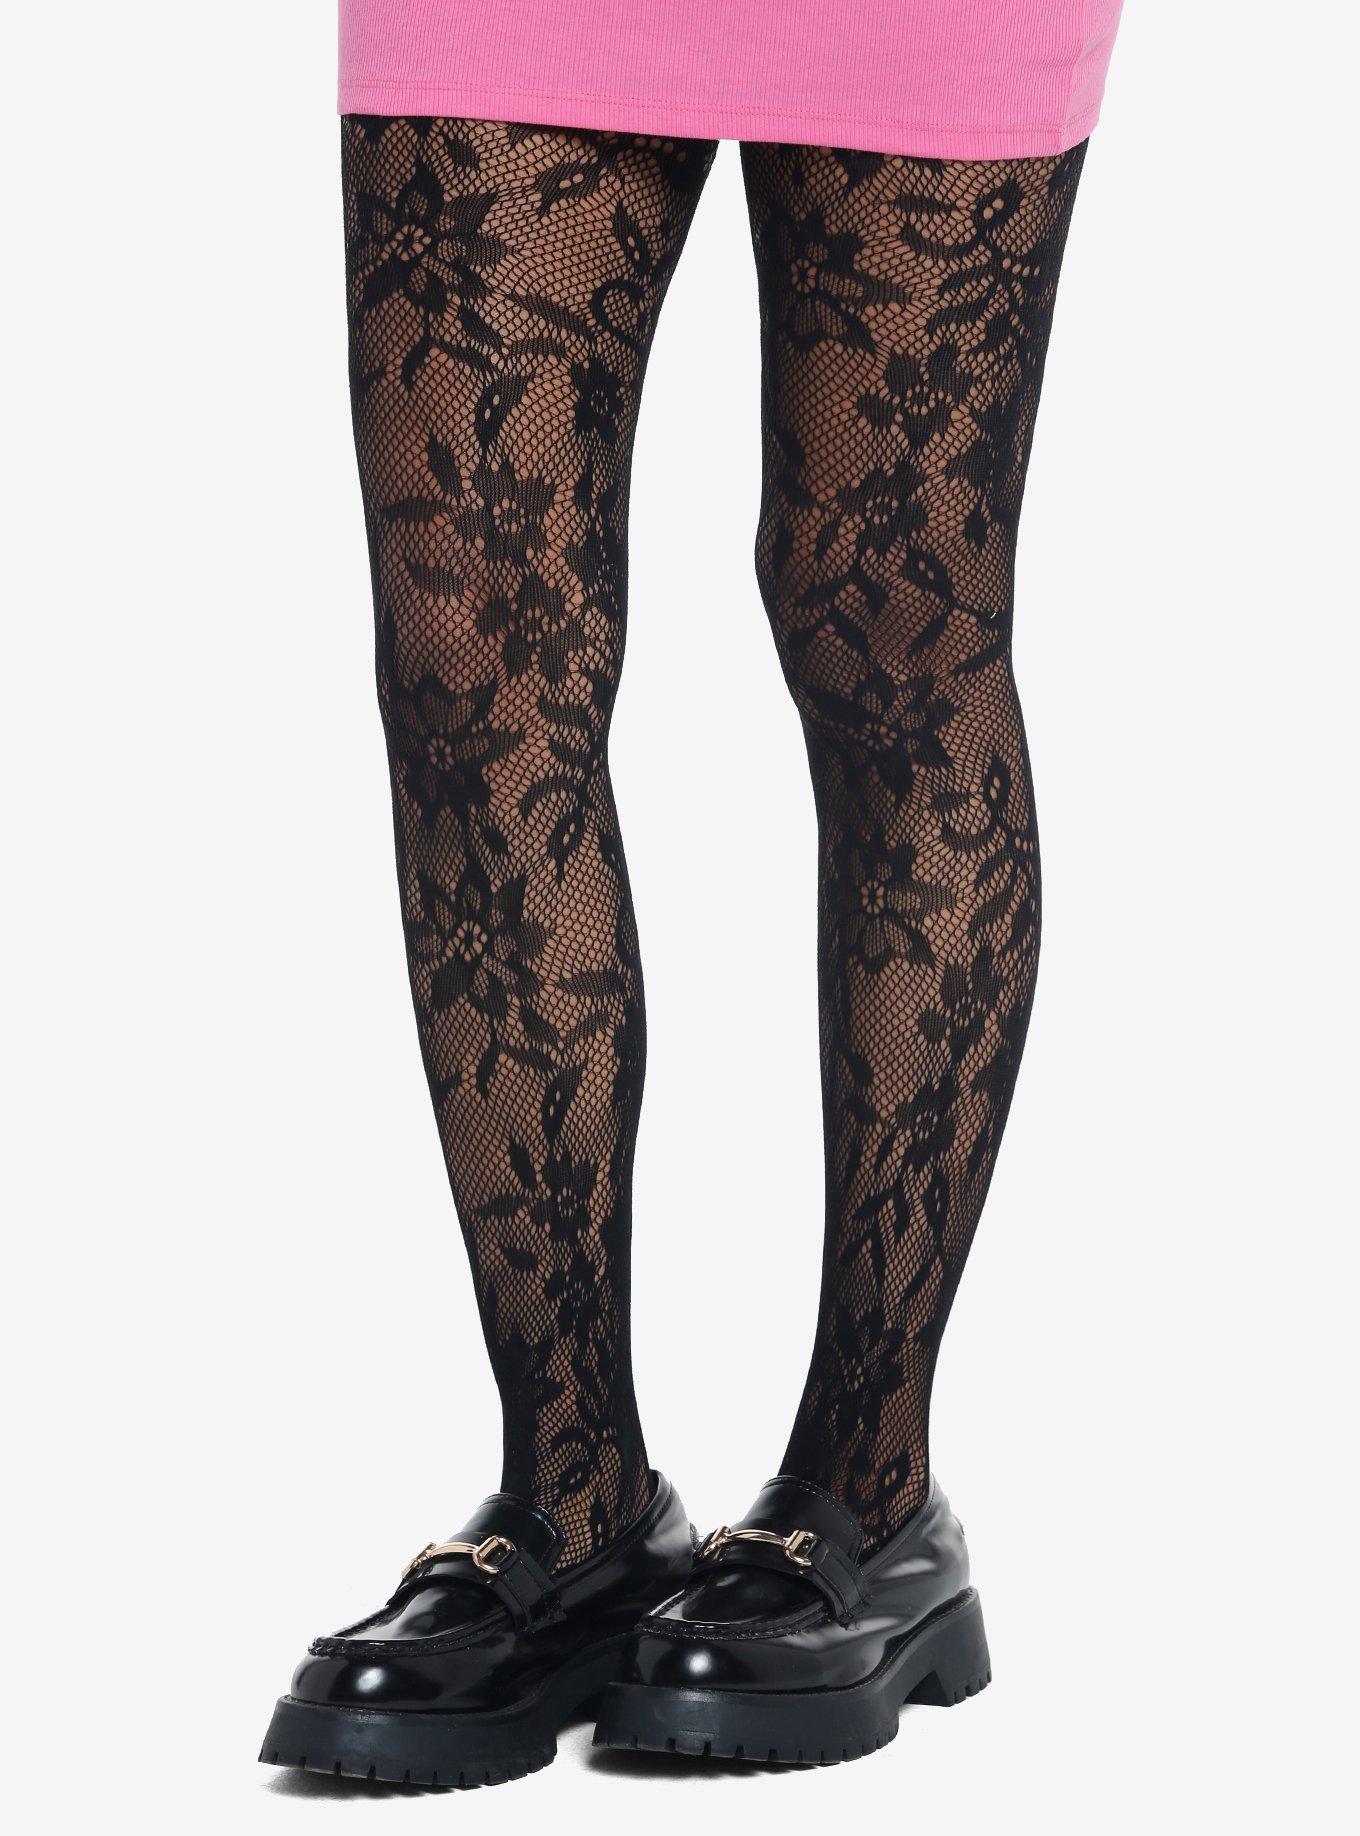 Sweetest Addition Black Floral Fishnet Tights